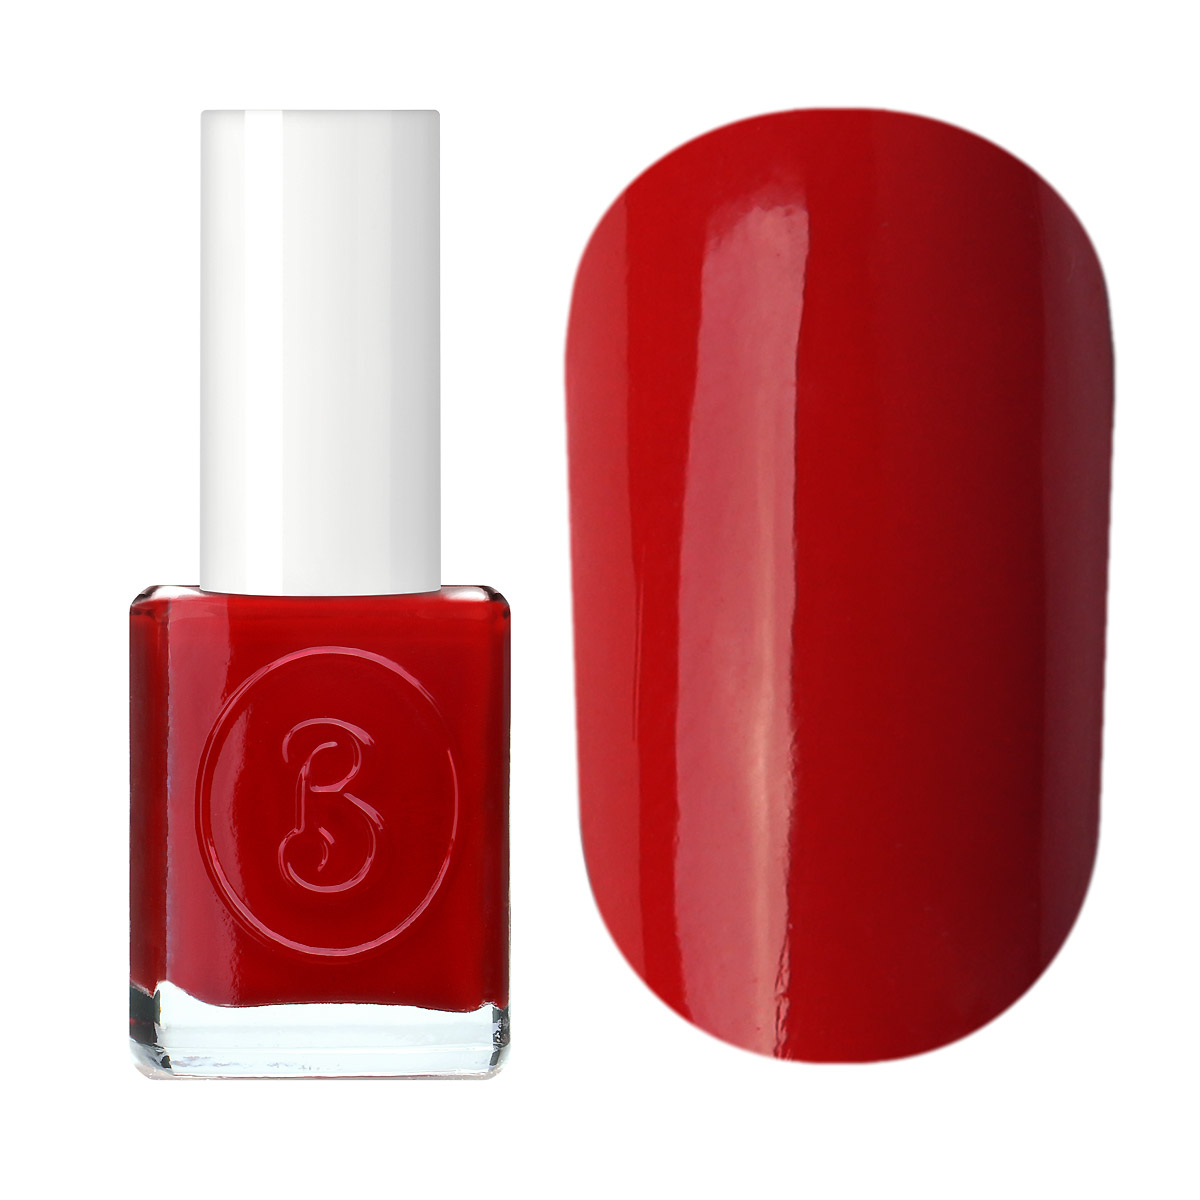 Berenice Oxygen Nail Polish / 11 coral red